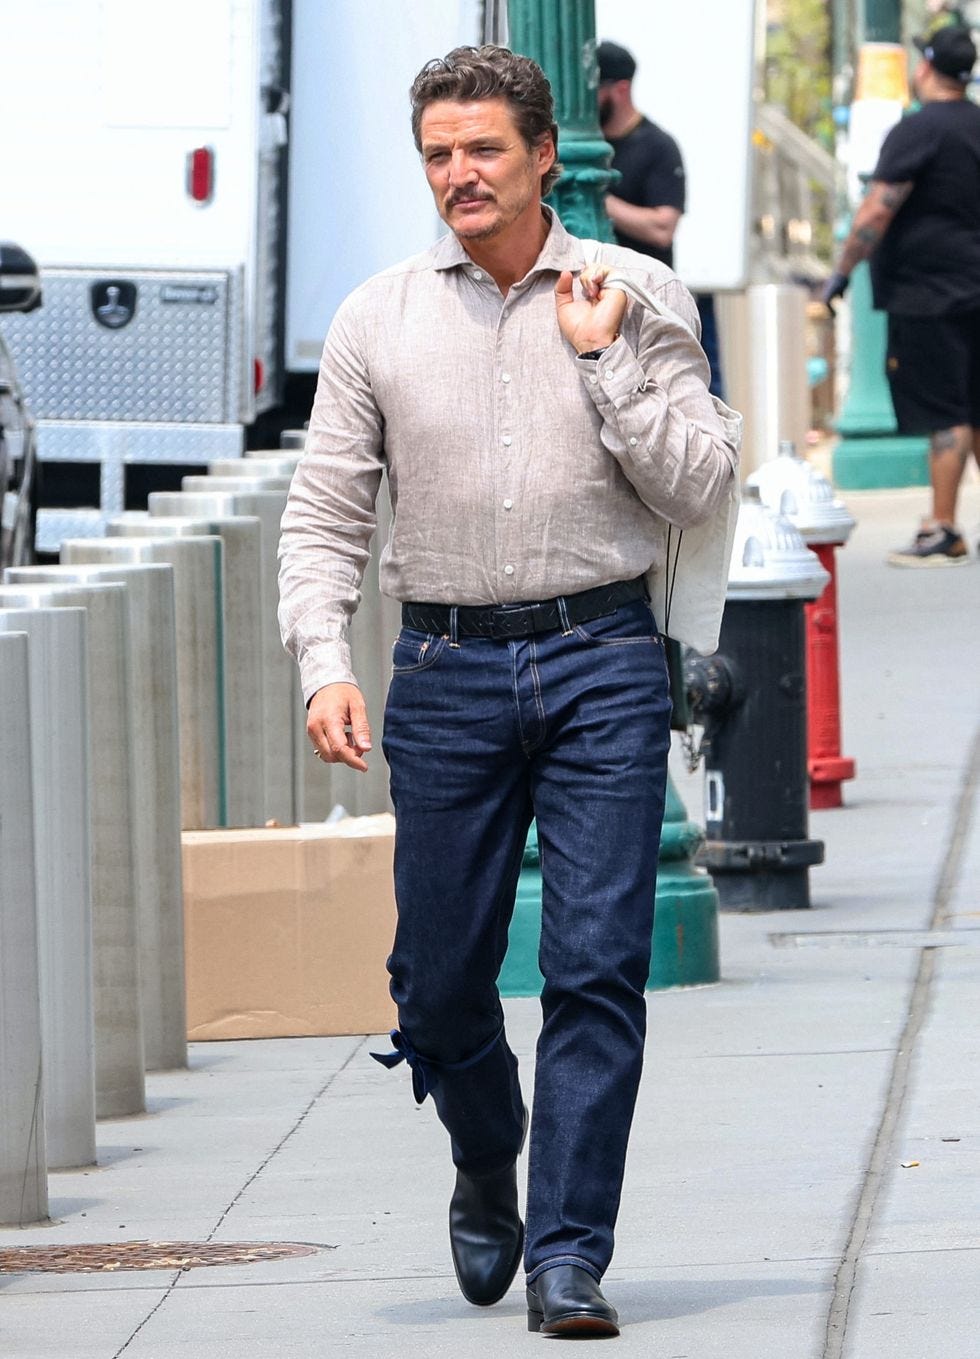 pedro pascal on the set of materialist